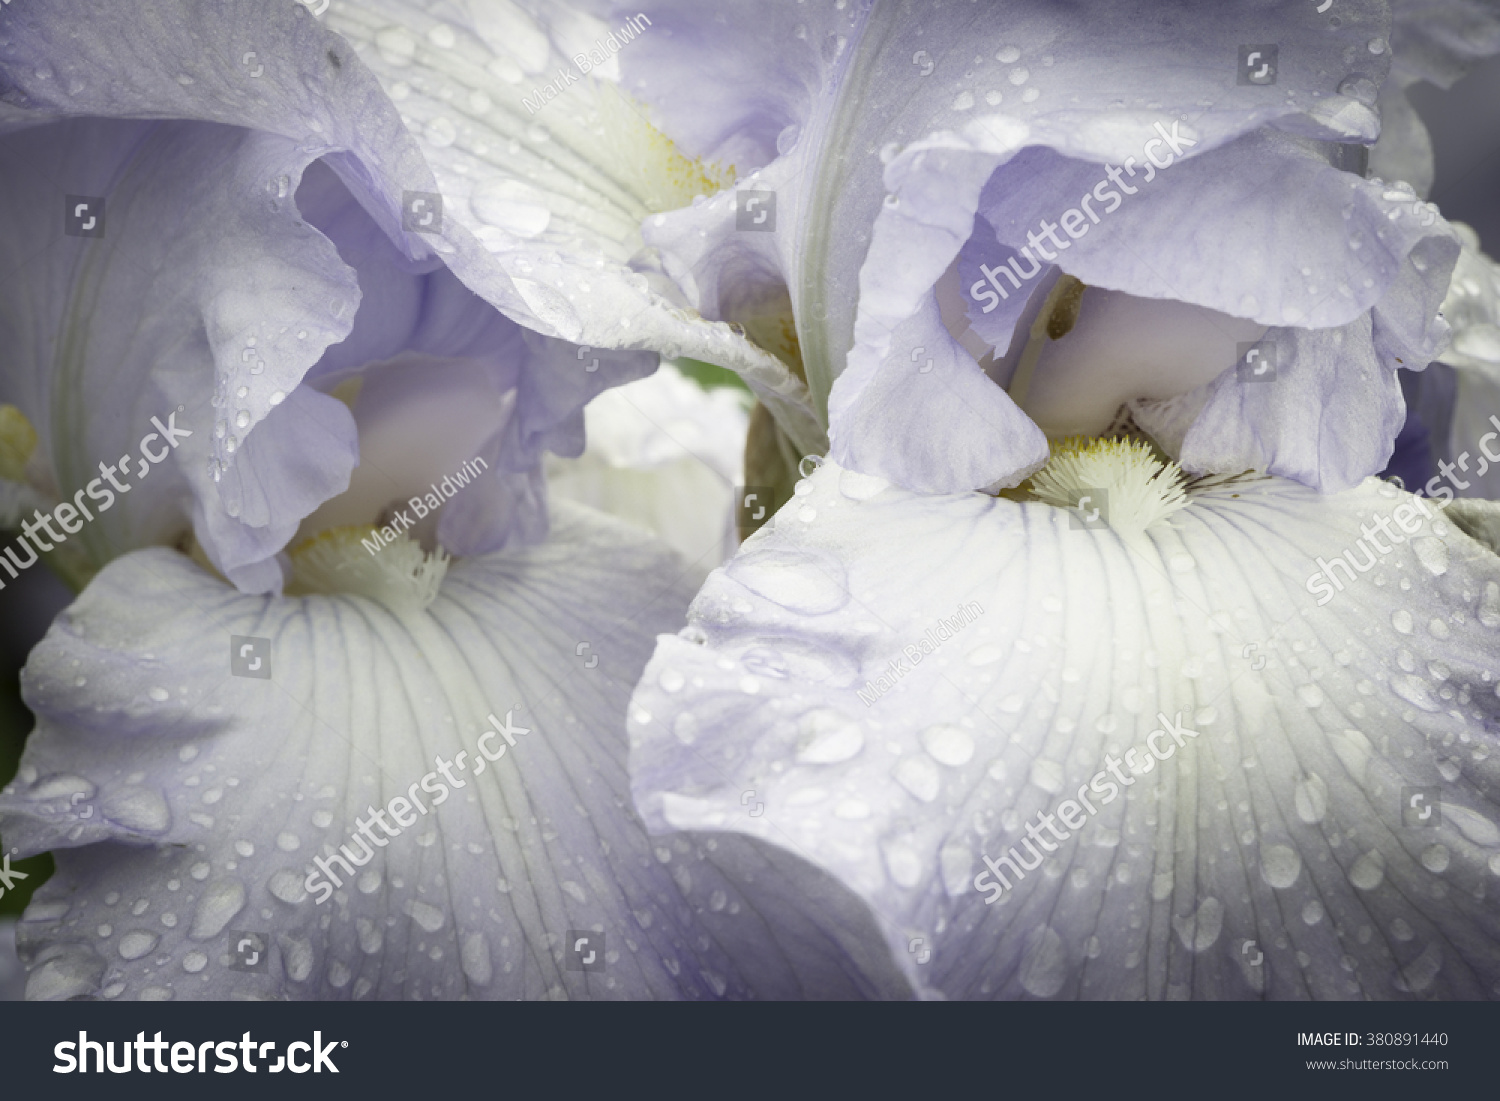 A close-up view of the beautiful petals of the bearded iris, still wet with water droplets after a spring shower. #380891440